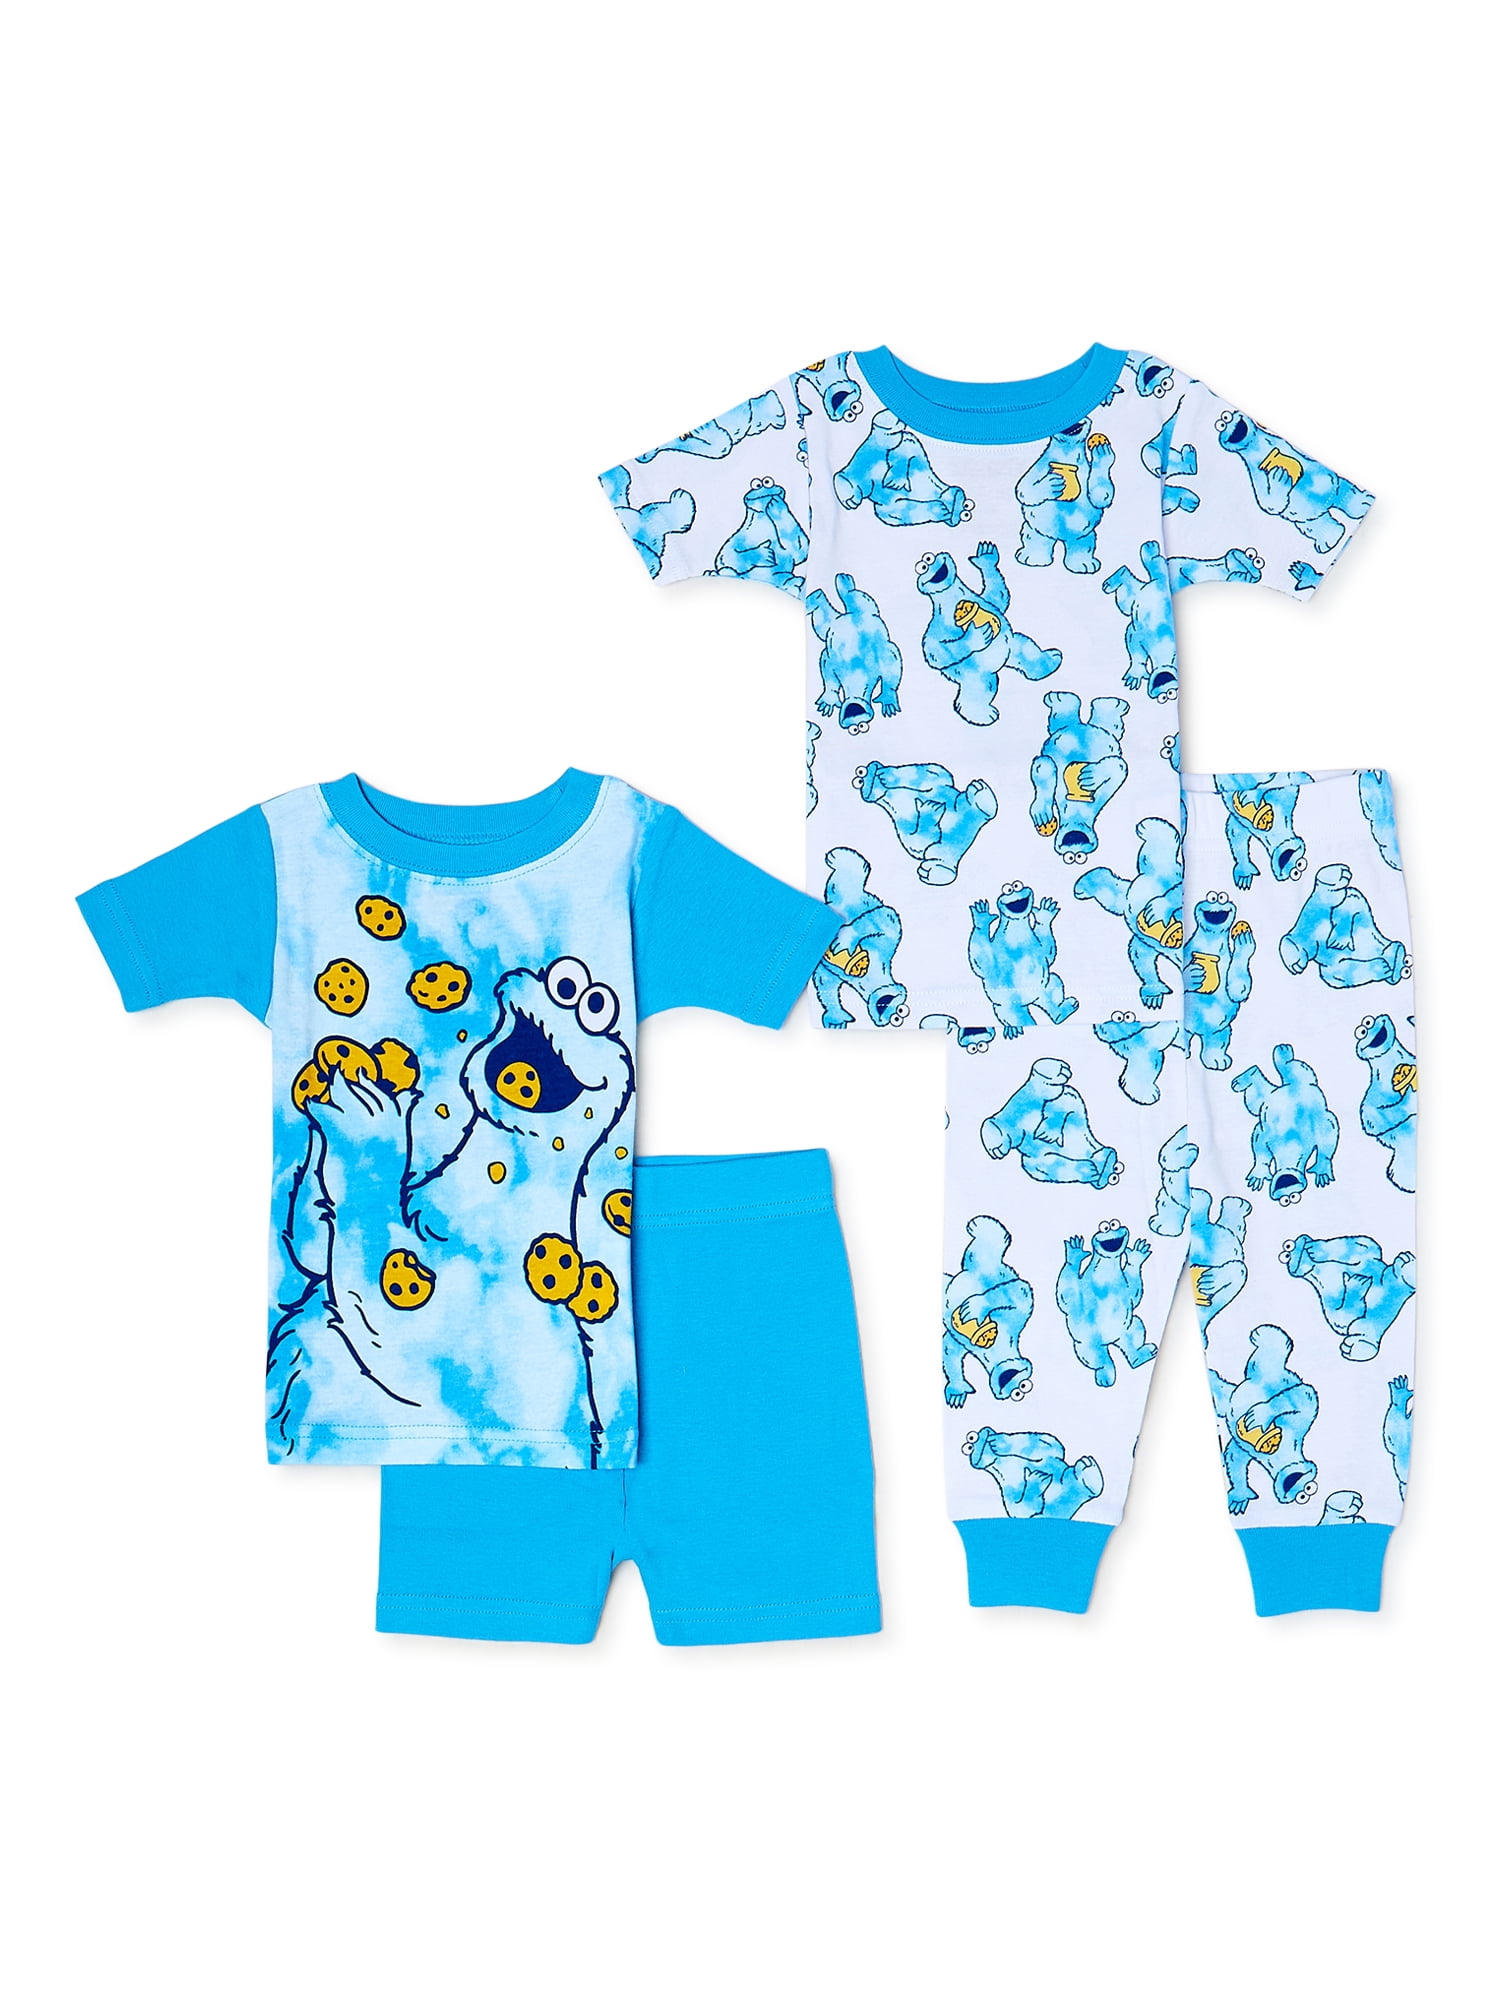 Cookie Monster Baby Boy T-Shirt, Short, and Pants Pajama Set, 4-Piece,  Sizes 9M-24M